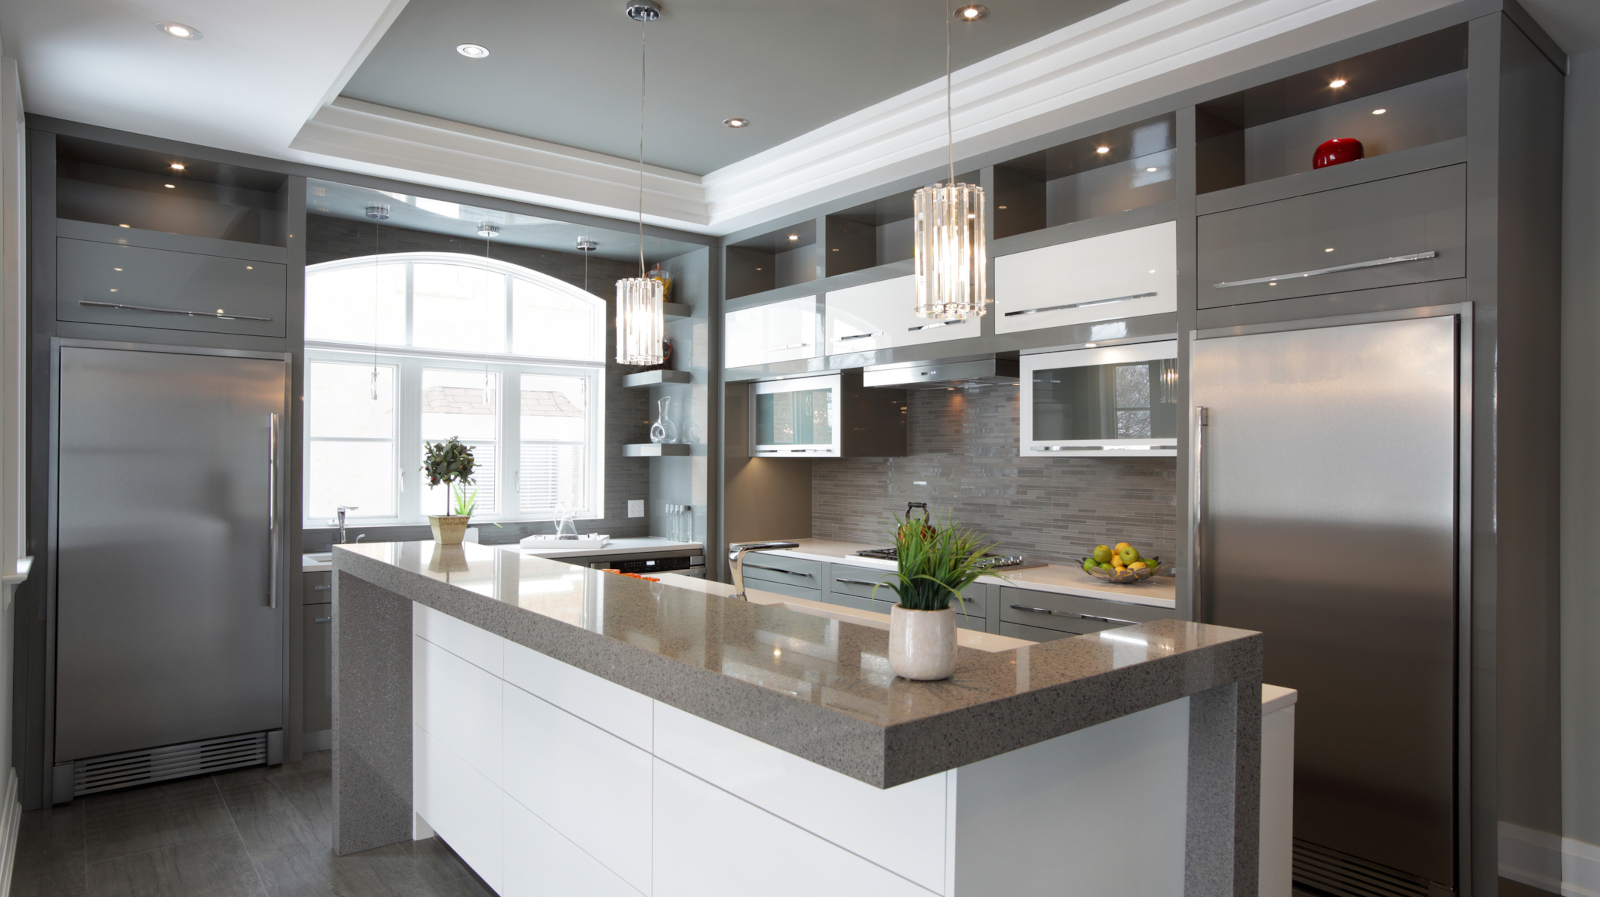 How to Choose the Right Materials for Your Kitchen Renovation